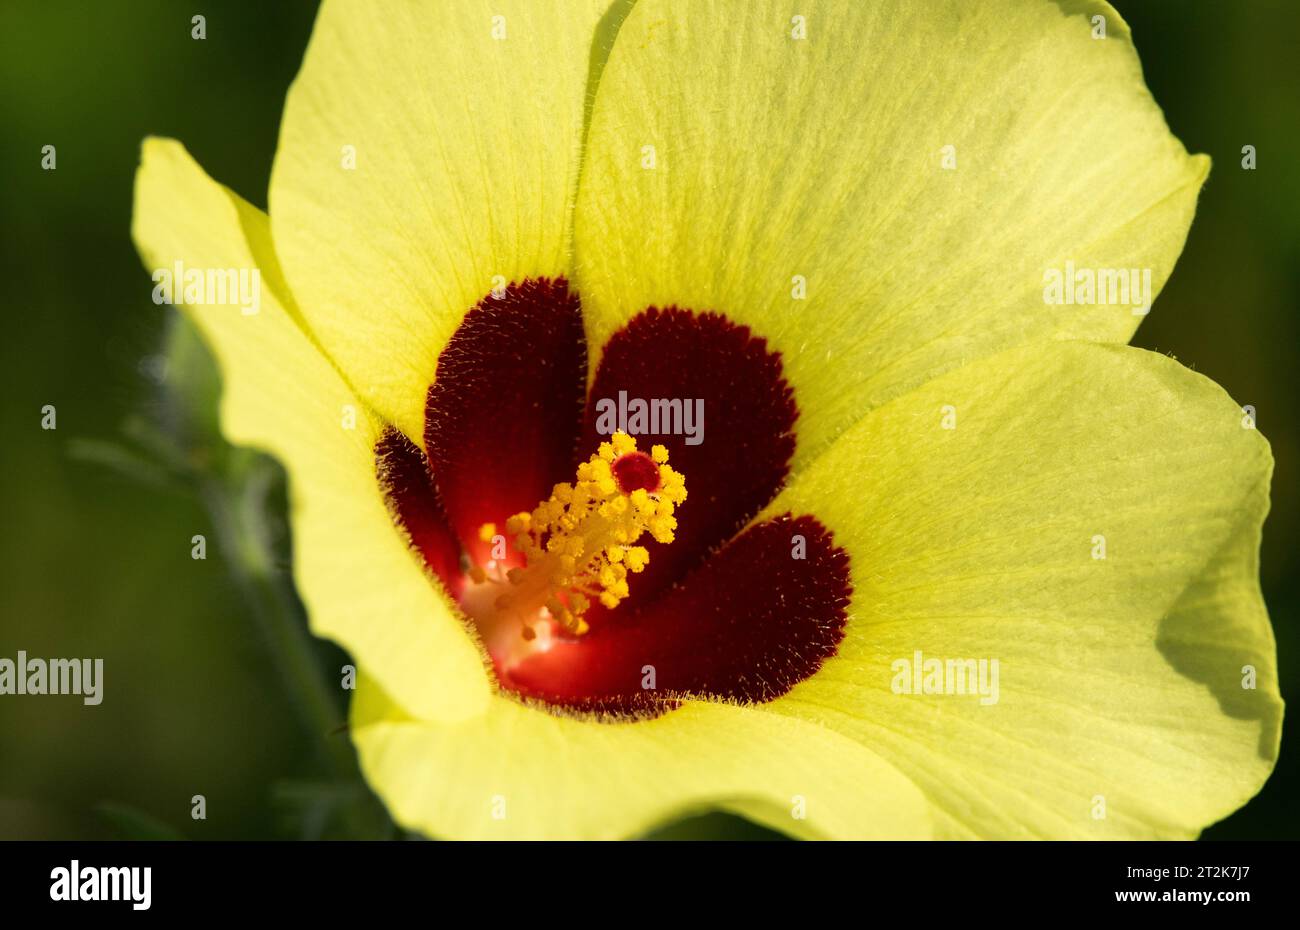 The Wild Stockrose is a showy herbaceous plant that flowers in the latter part of the rainy season. The bloom has a typical hibiscus structure. Stock Photo